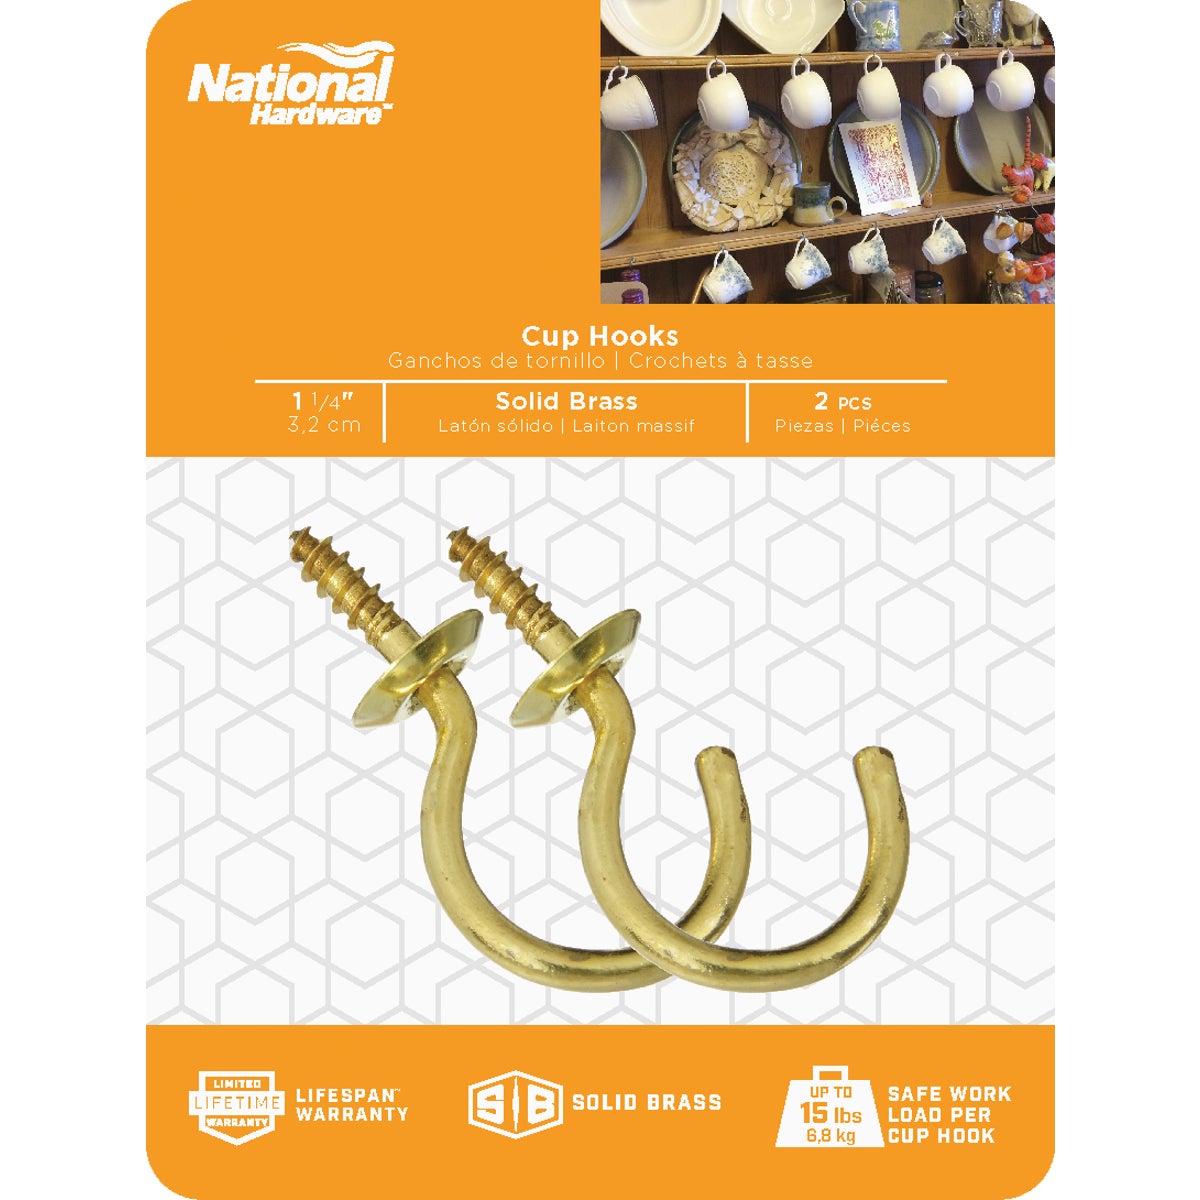 National V2021 1-1/4 In. Solid Brass Series Cup Hook (2 Count)